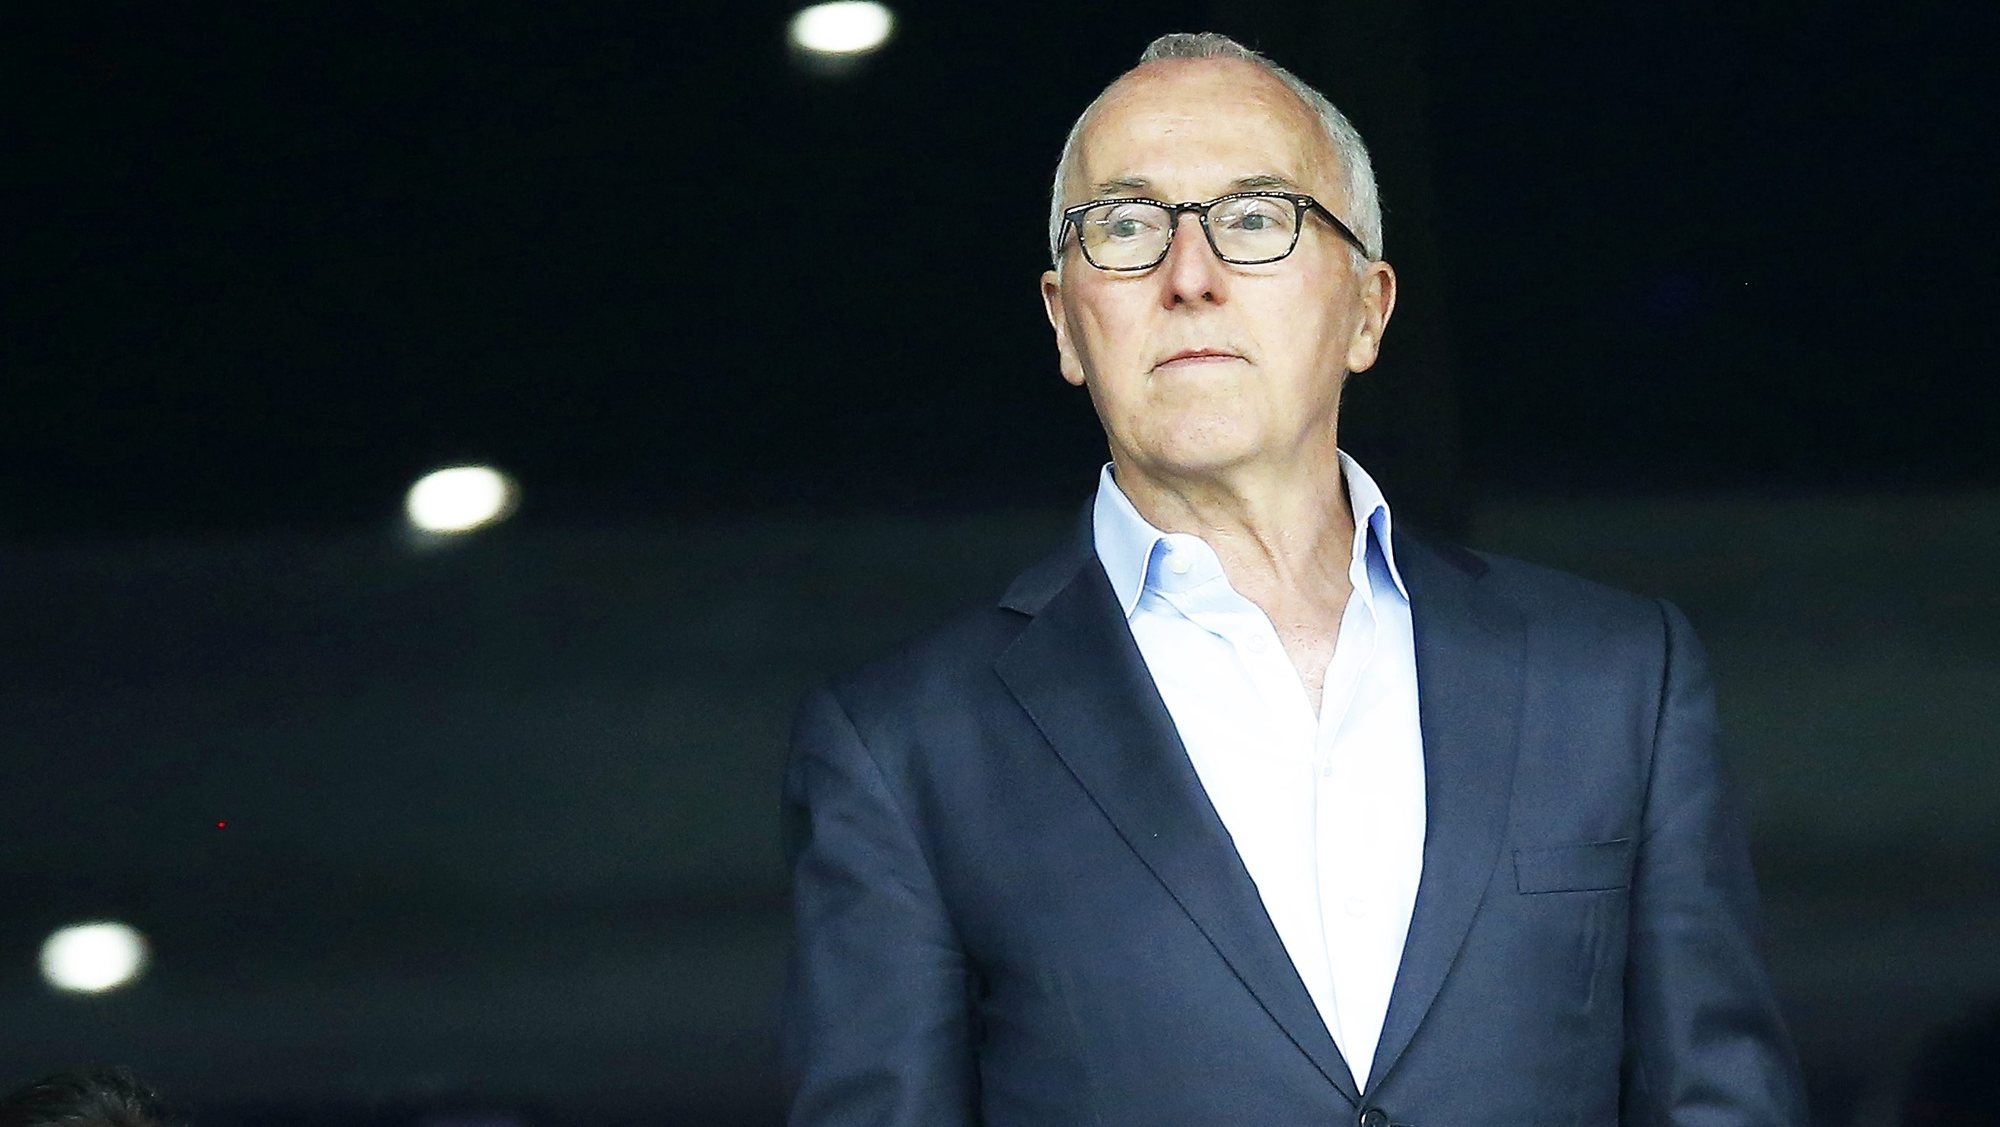 epa05546762 Olympique Marseille&#039;s new owner, US businessman Frank McCourt attends the French Ligue 1 soccer match between Olympique Marseille and Olympique Lyon at Stade Velodrome in Marseille, southern France, 18 September 2016.  EPA/SEBASTIEN NOGIER